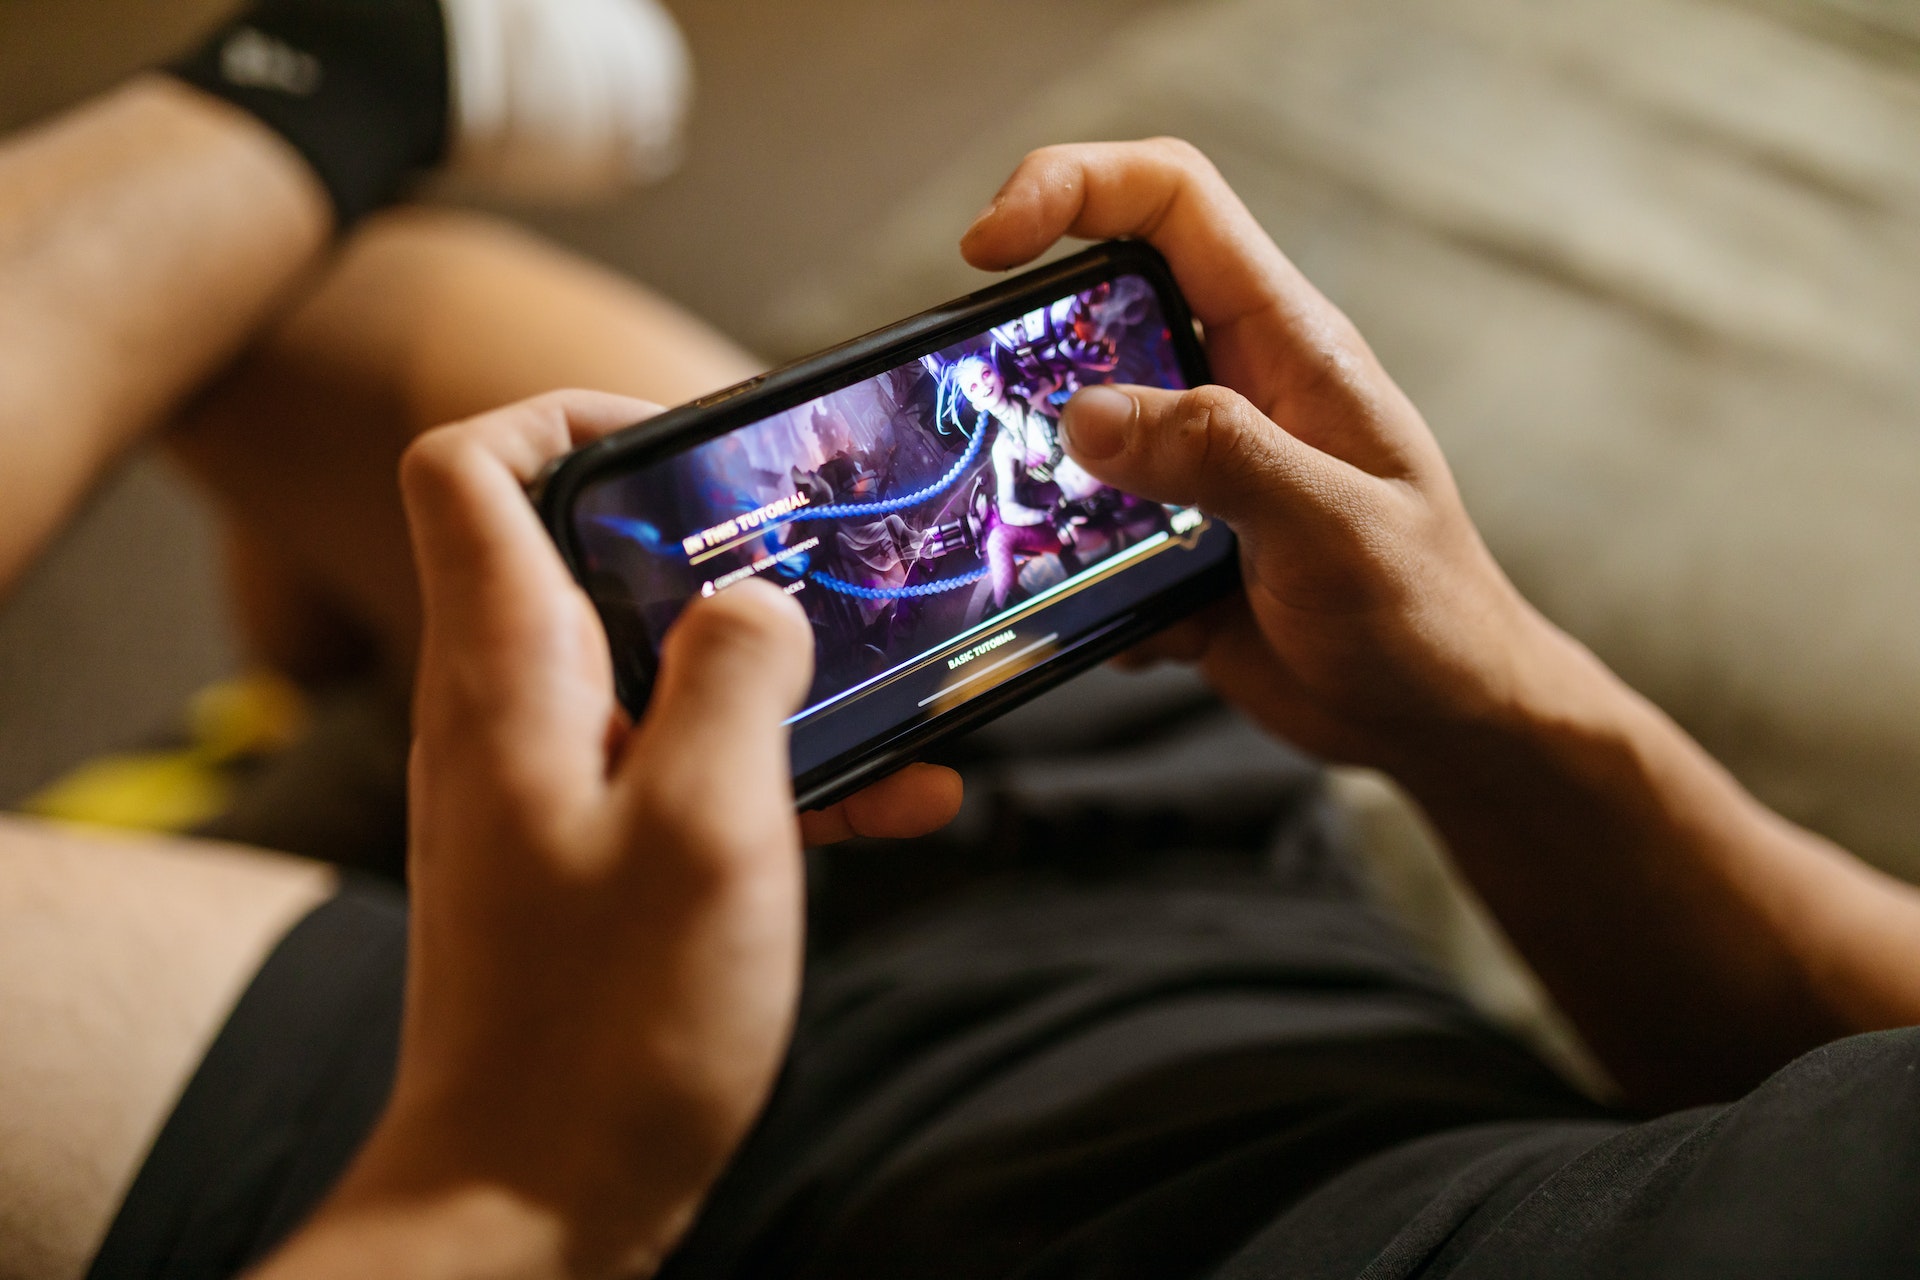 Gaming and video streaming on mobile devices